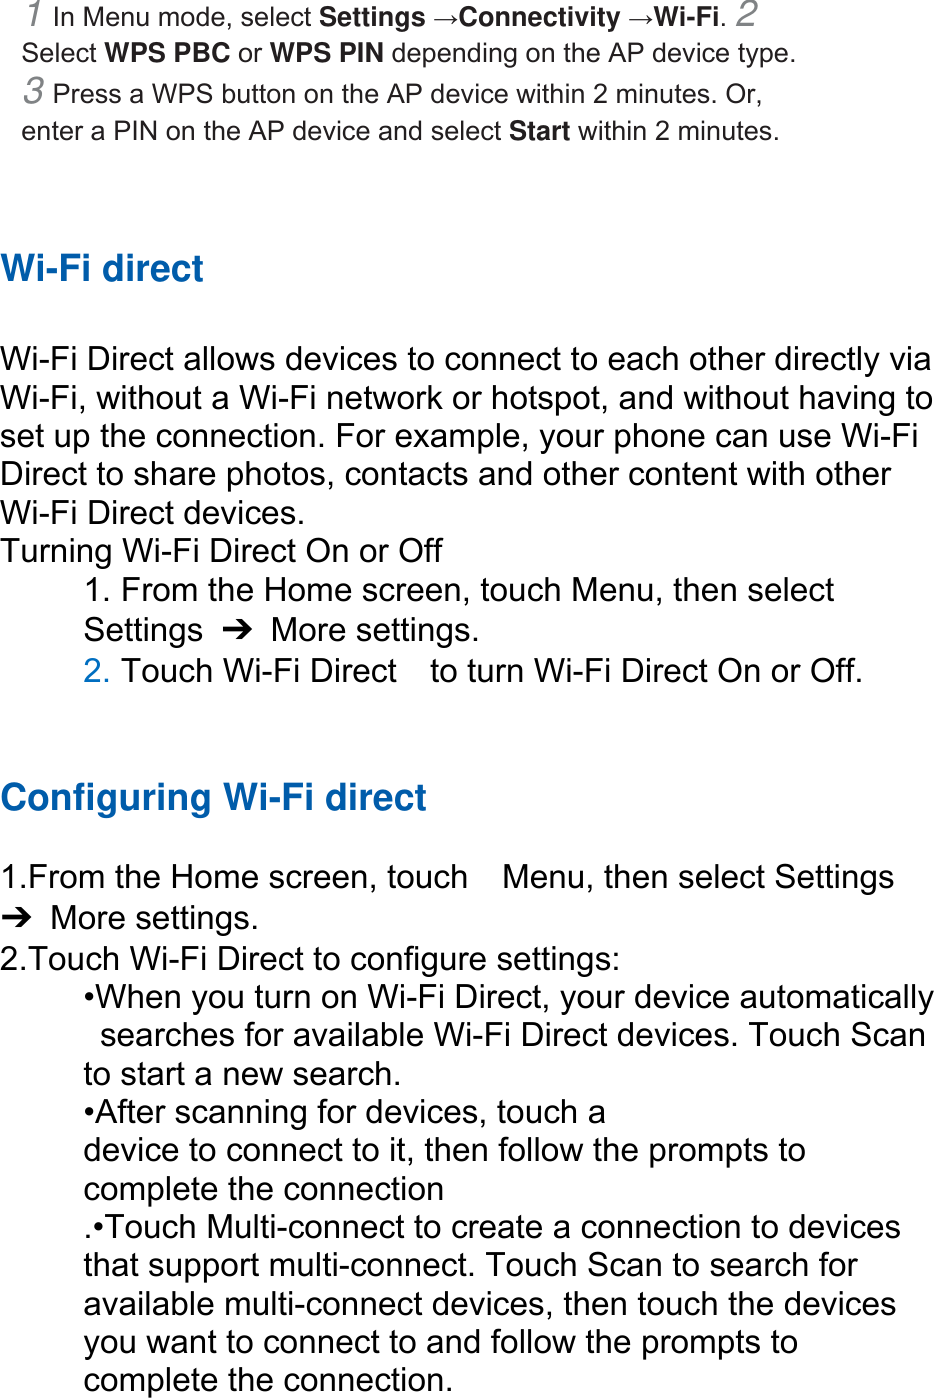 1 In Menu mode, select Settings →Connectivity →Wi-Fi. 2 Select WPS PBC or WPS PIN depending on the AP device type. 3 Press a WPS button on the AP device within 2 minutes. Or, enter a PIN on the AP device and select Start within 2 minutes.     Wi-Fi direct  Wi-Fi Direct allows devices to connect to each other directly via Wi-Fi, without a Wi-Fi network or hotspot, and without having to set up the connection. For example, your phone can use Wi-Fi Direct to share photos, contacts and other content with other Wi-Fi Direct devices.   Turning Wi-Fi Direct On or Off 1. From the Home screen, touch Menu, then select   Settings  ➔ More settings. 2. Touch Wi-Fi Direct    to turn Wi-Fi Direct On or Off.   Configuring Wi-Fi direct   1.From the Home screen, touch    Menu, then select Settings ➔ More settings. 2.Touch Wi-Fi Direct to configure settings:   •When you turn on Wi-Fi Direct, your device automatically   searches for available Wi-Fi Direct devices. Touch Scan   to start a new search. •After scanning for devices, touch a   device to connect to it, then follow the prompts to   complete the connection .•Touch Multi-connect to create a connection to devices that support multi-connect. Touch Scan to search for available multi-connect devices, then touch the devices you want to connect to and follow the prompts to complete the connection.  